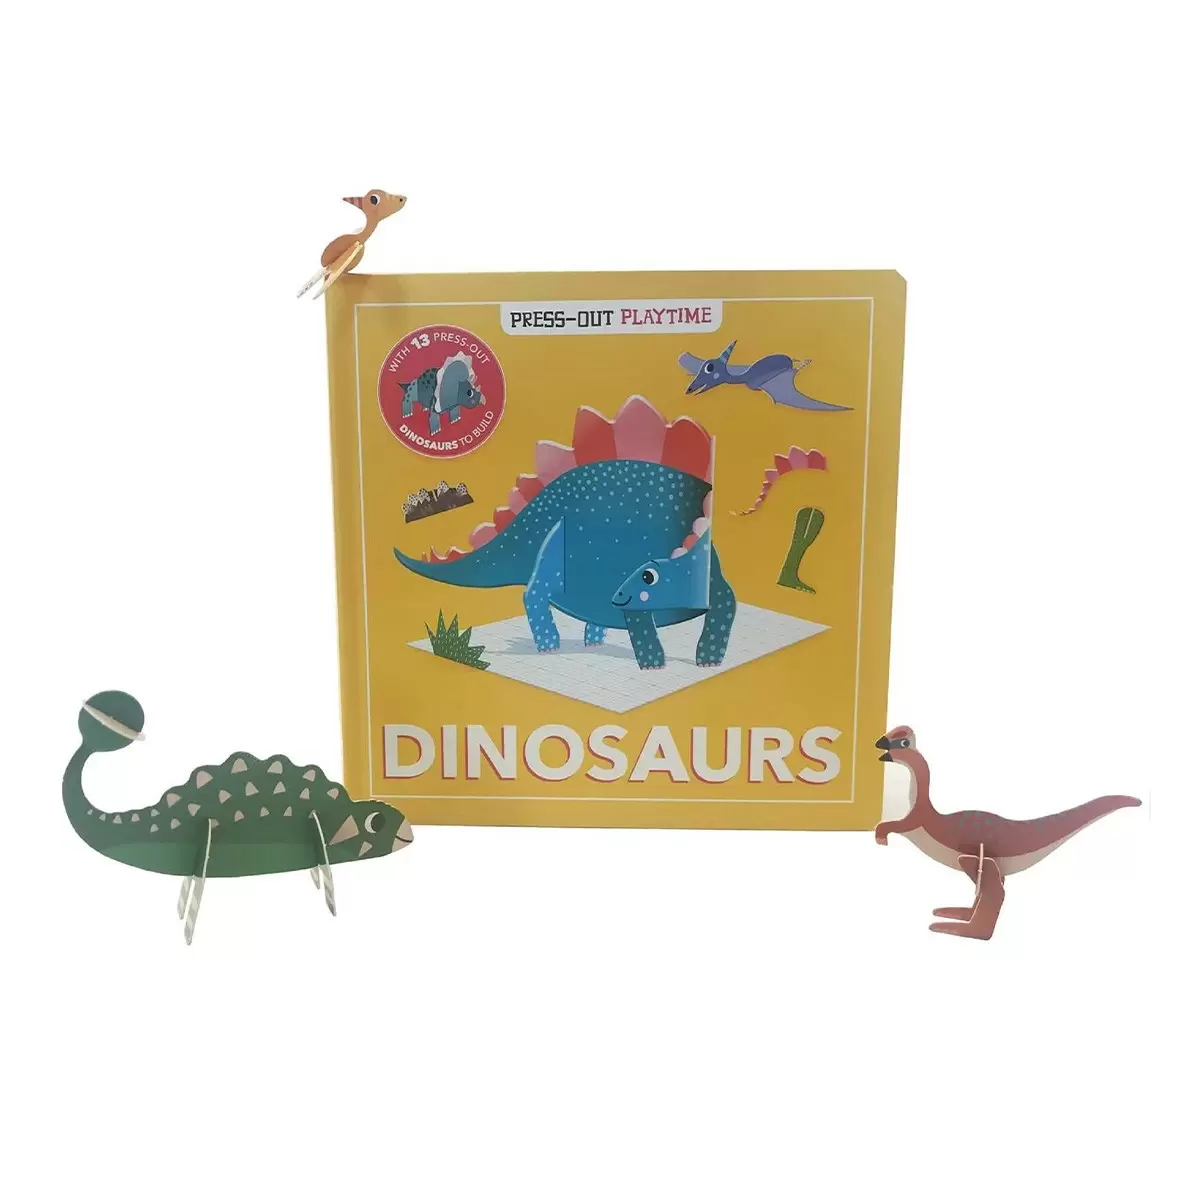 Press-Out Playtime Book 外文遊戲書 Dinosaurs